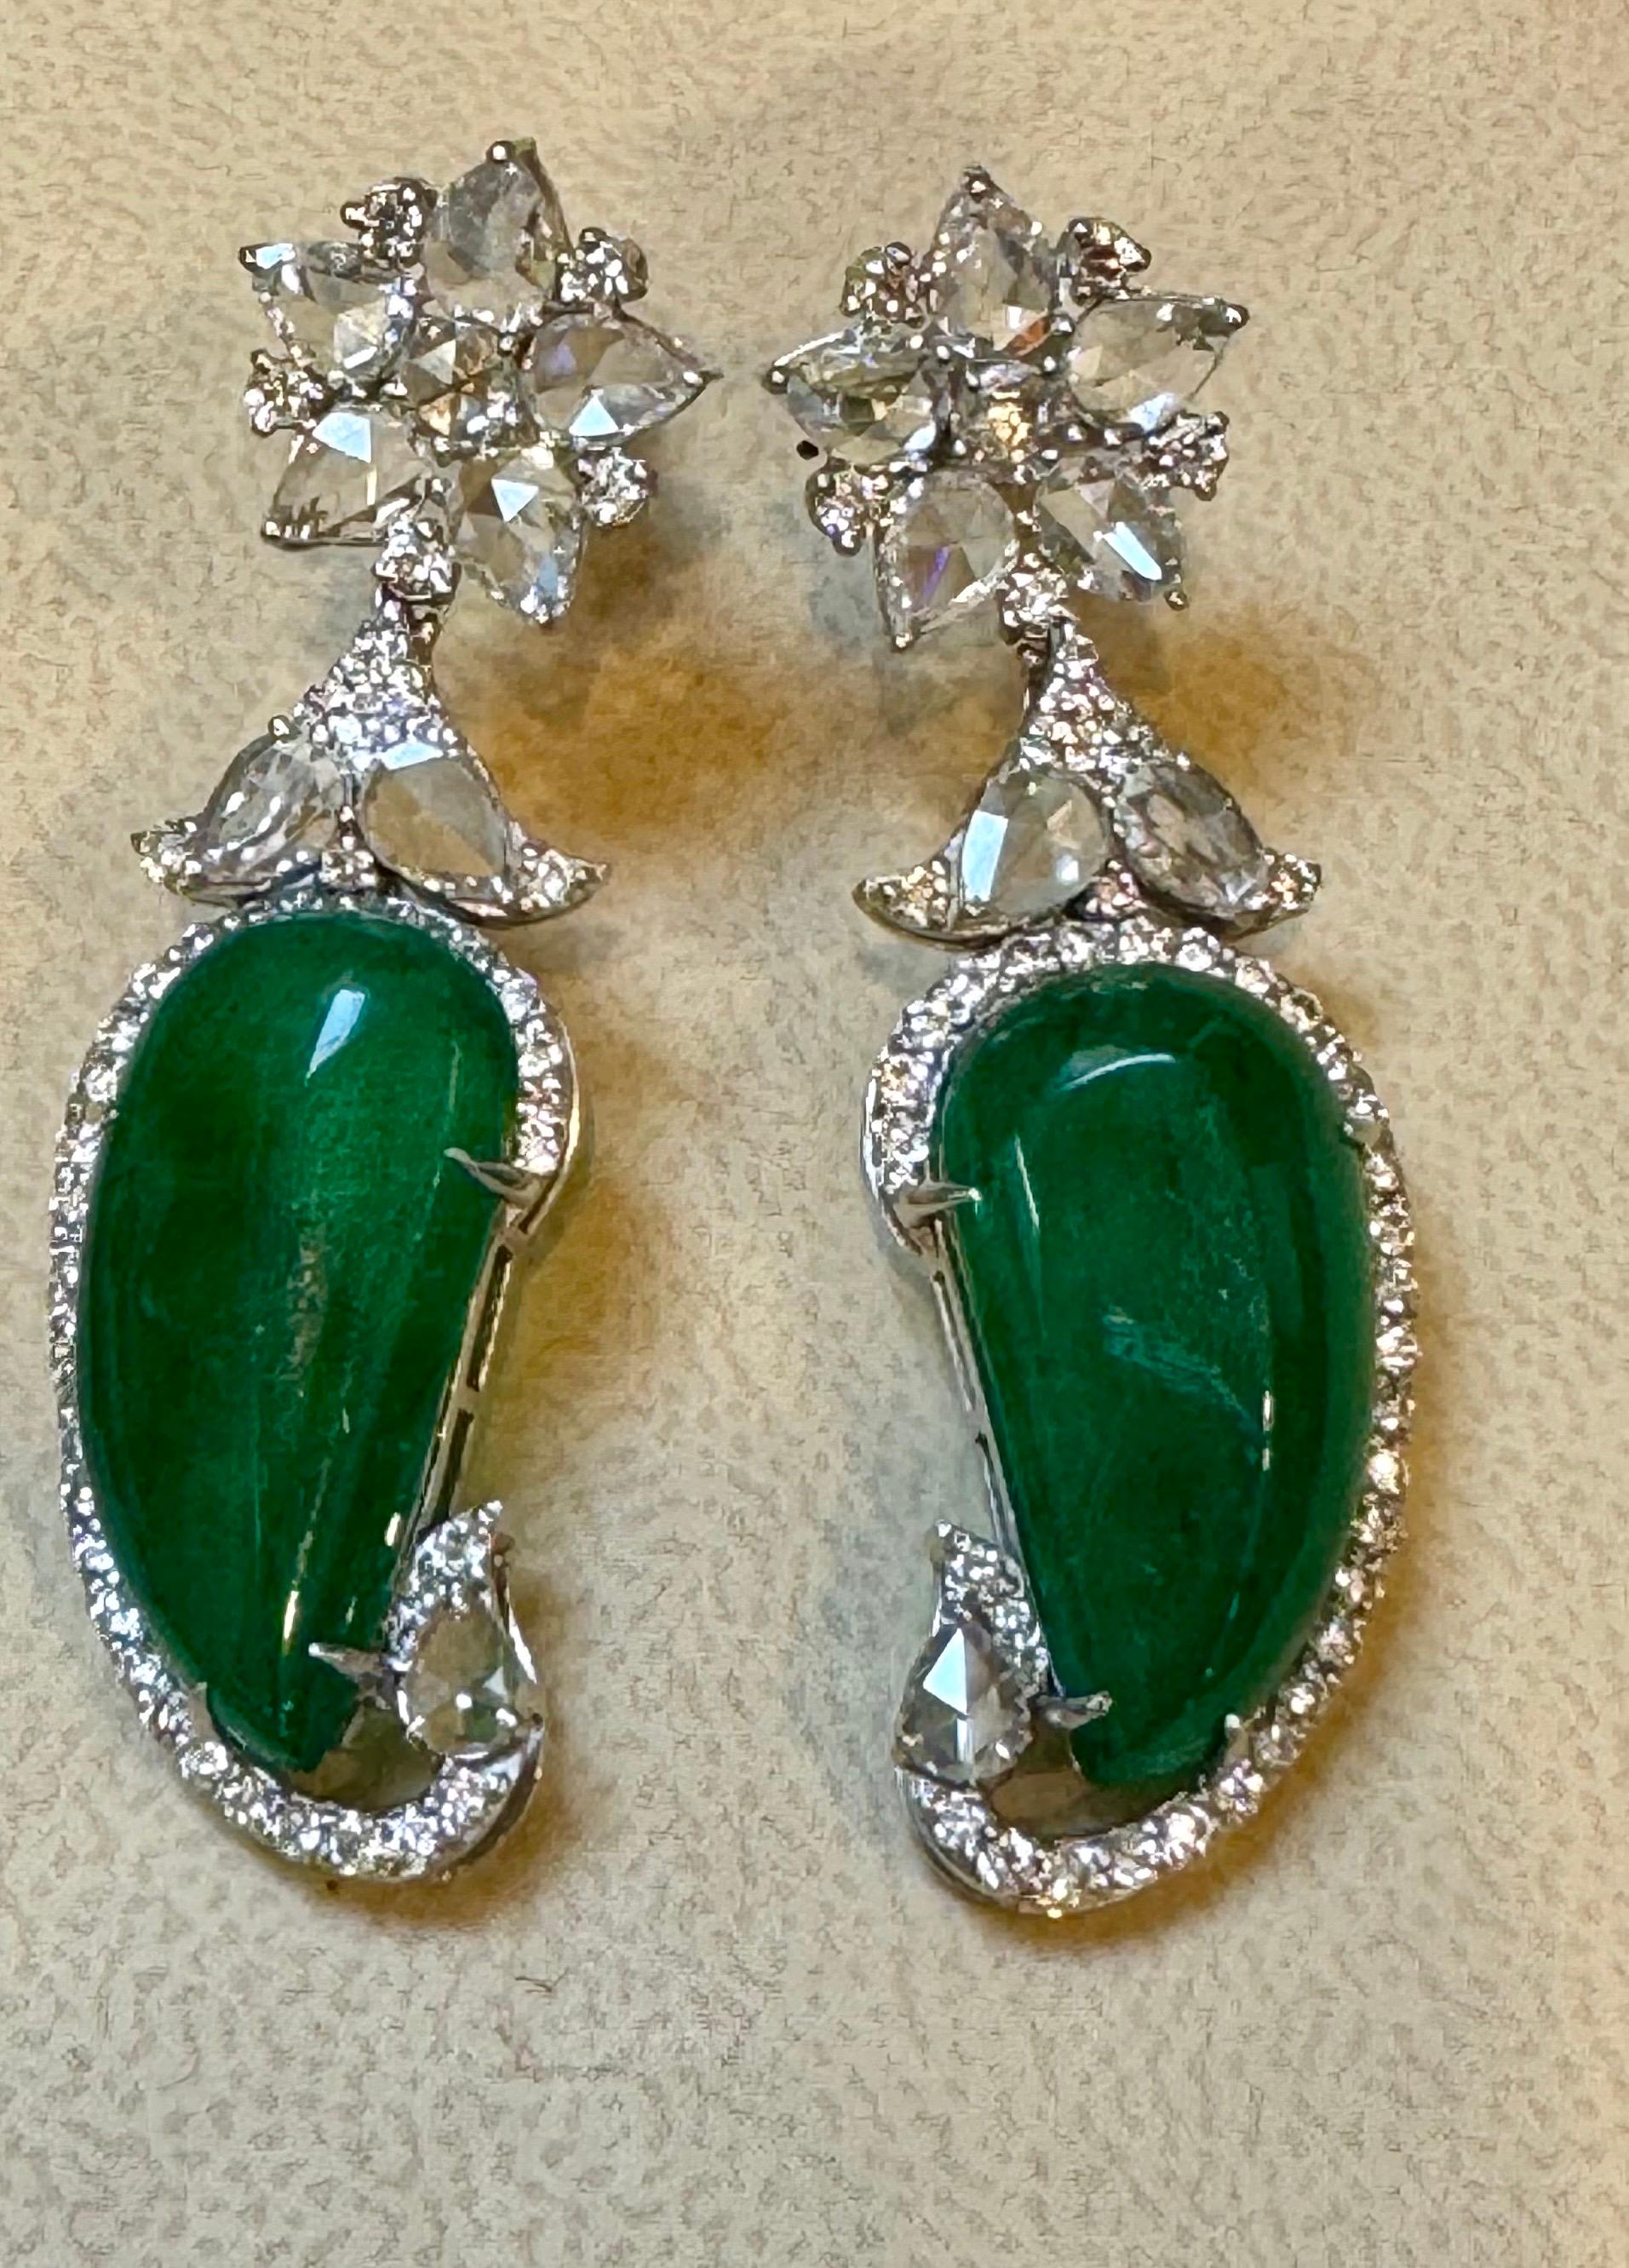 20 Ct Fine Emerald Cabochon & 4 Ct Rose Cut Diamond  18 Kt White Gold  Earrings
Emerald Diamond Post Earrings 18 Karat White Gold
Two fine  leaf emerald Cabochon of total 20  ct exact known weight. Emeralds are surrounded by Brilliant cut round